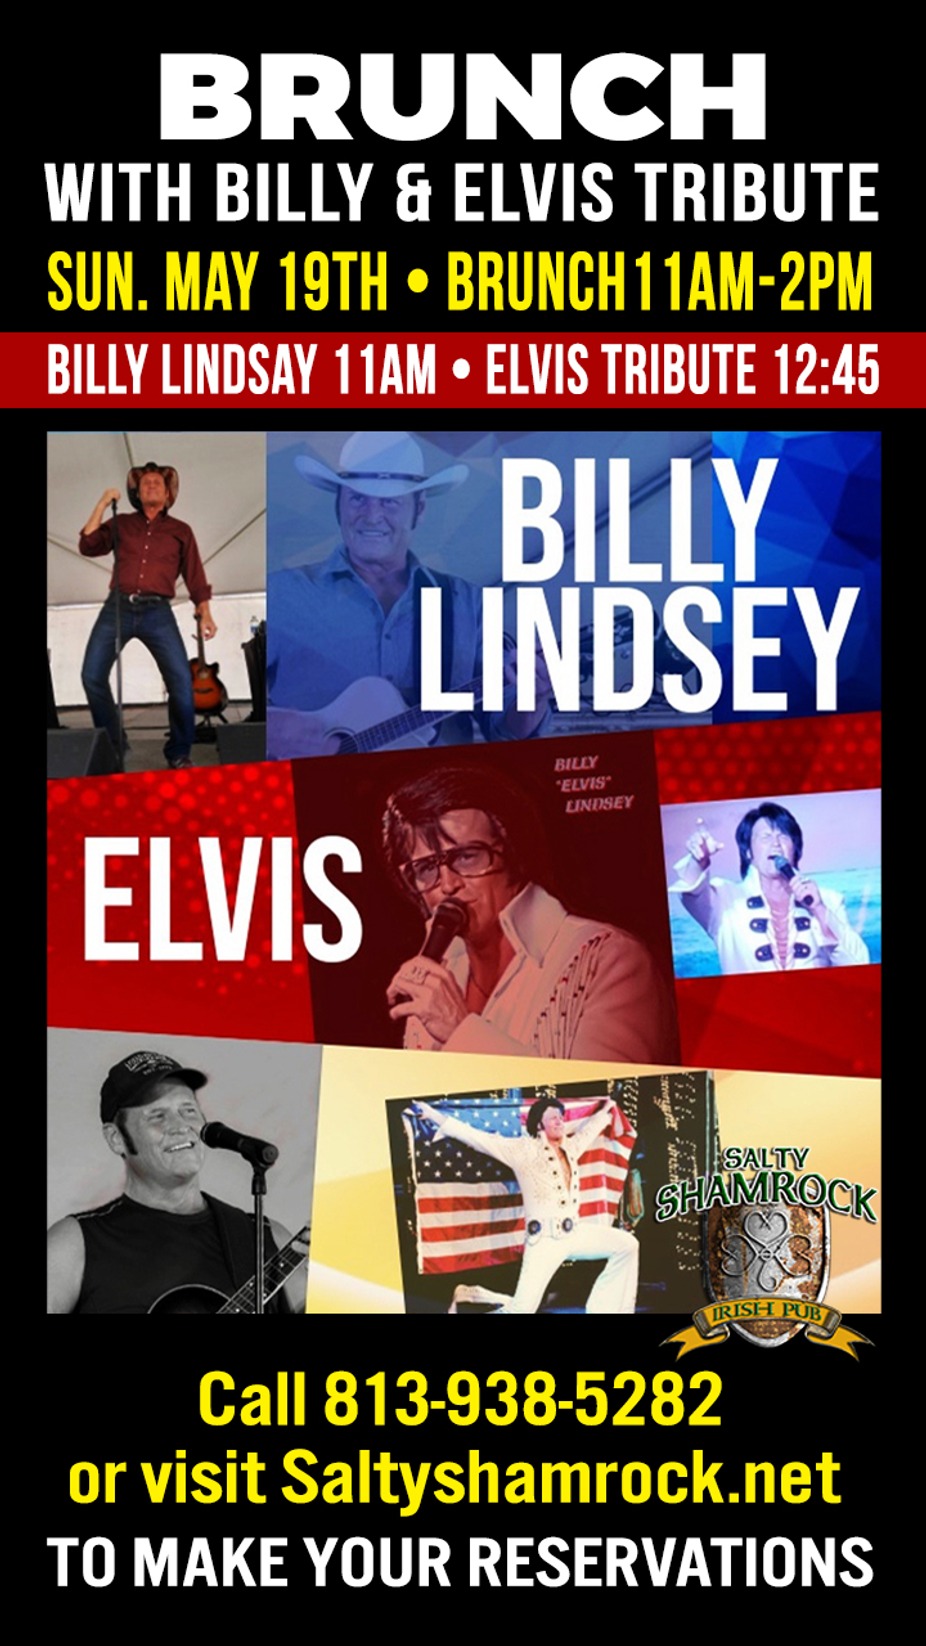 Brunch with Billy & Elvis Tribute event photo